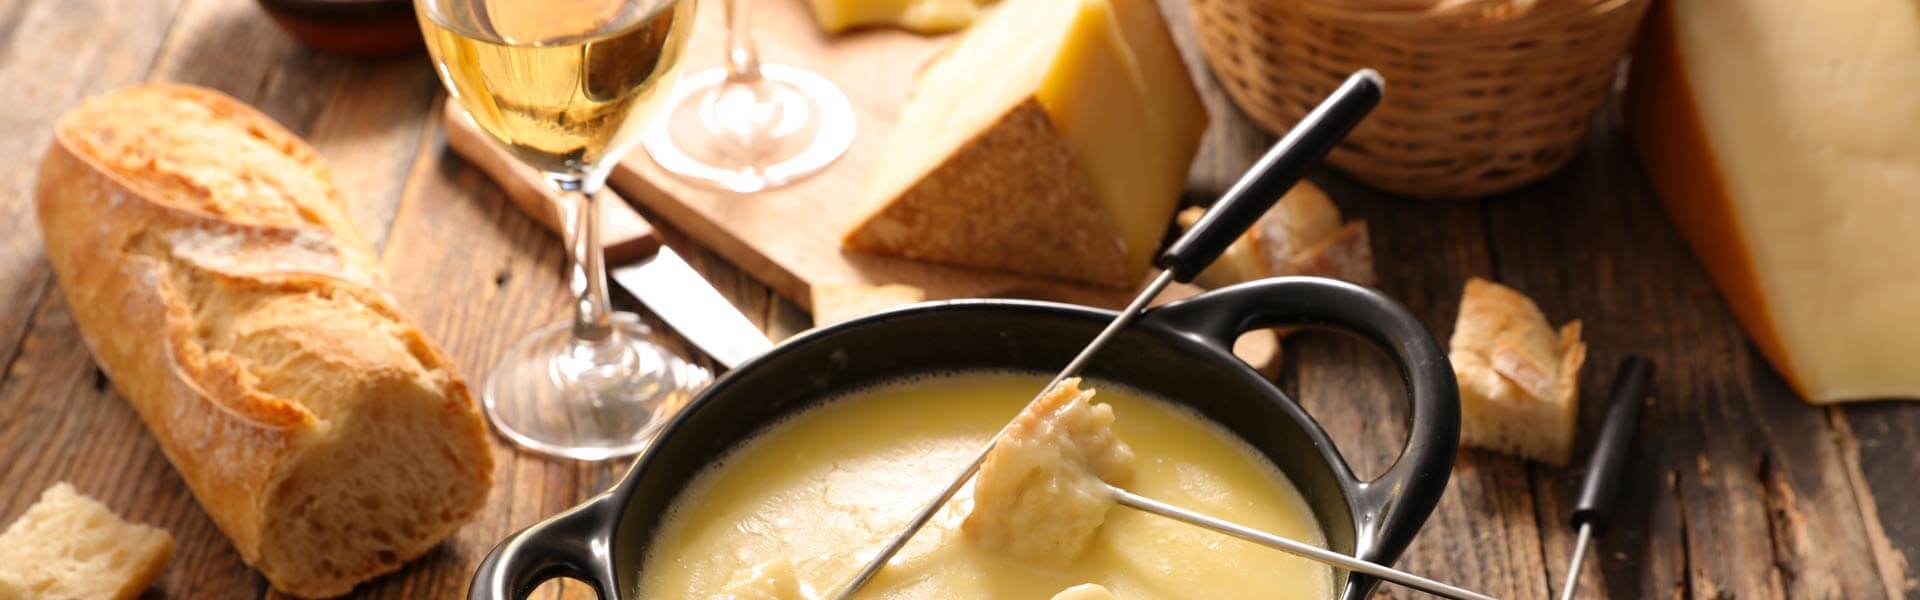 Convivial Christmas party with a fondue evening: b-ceed events